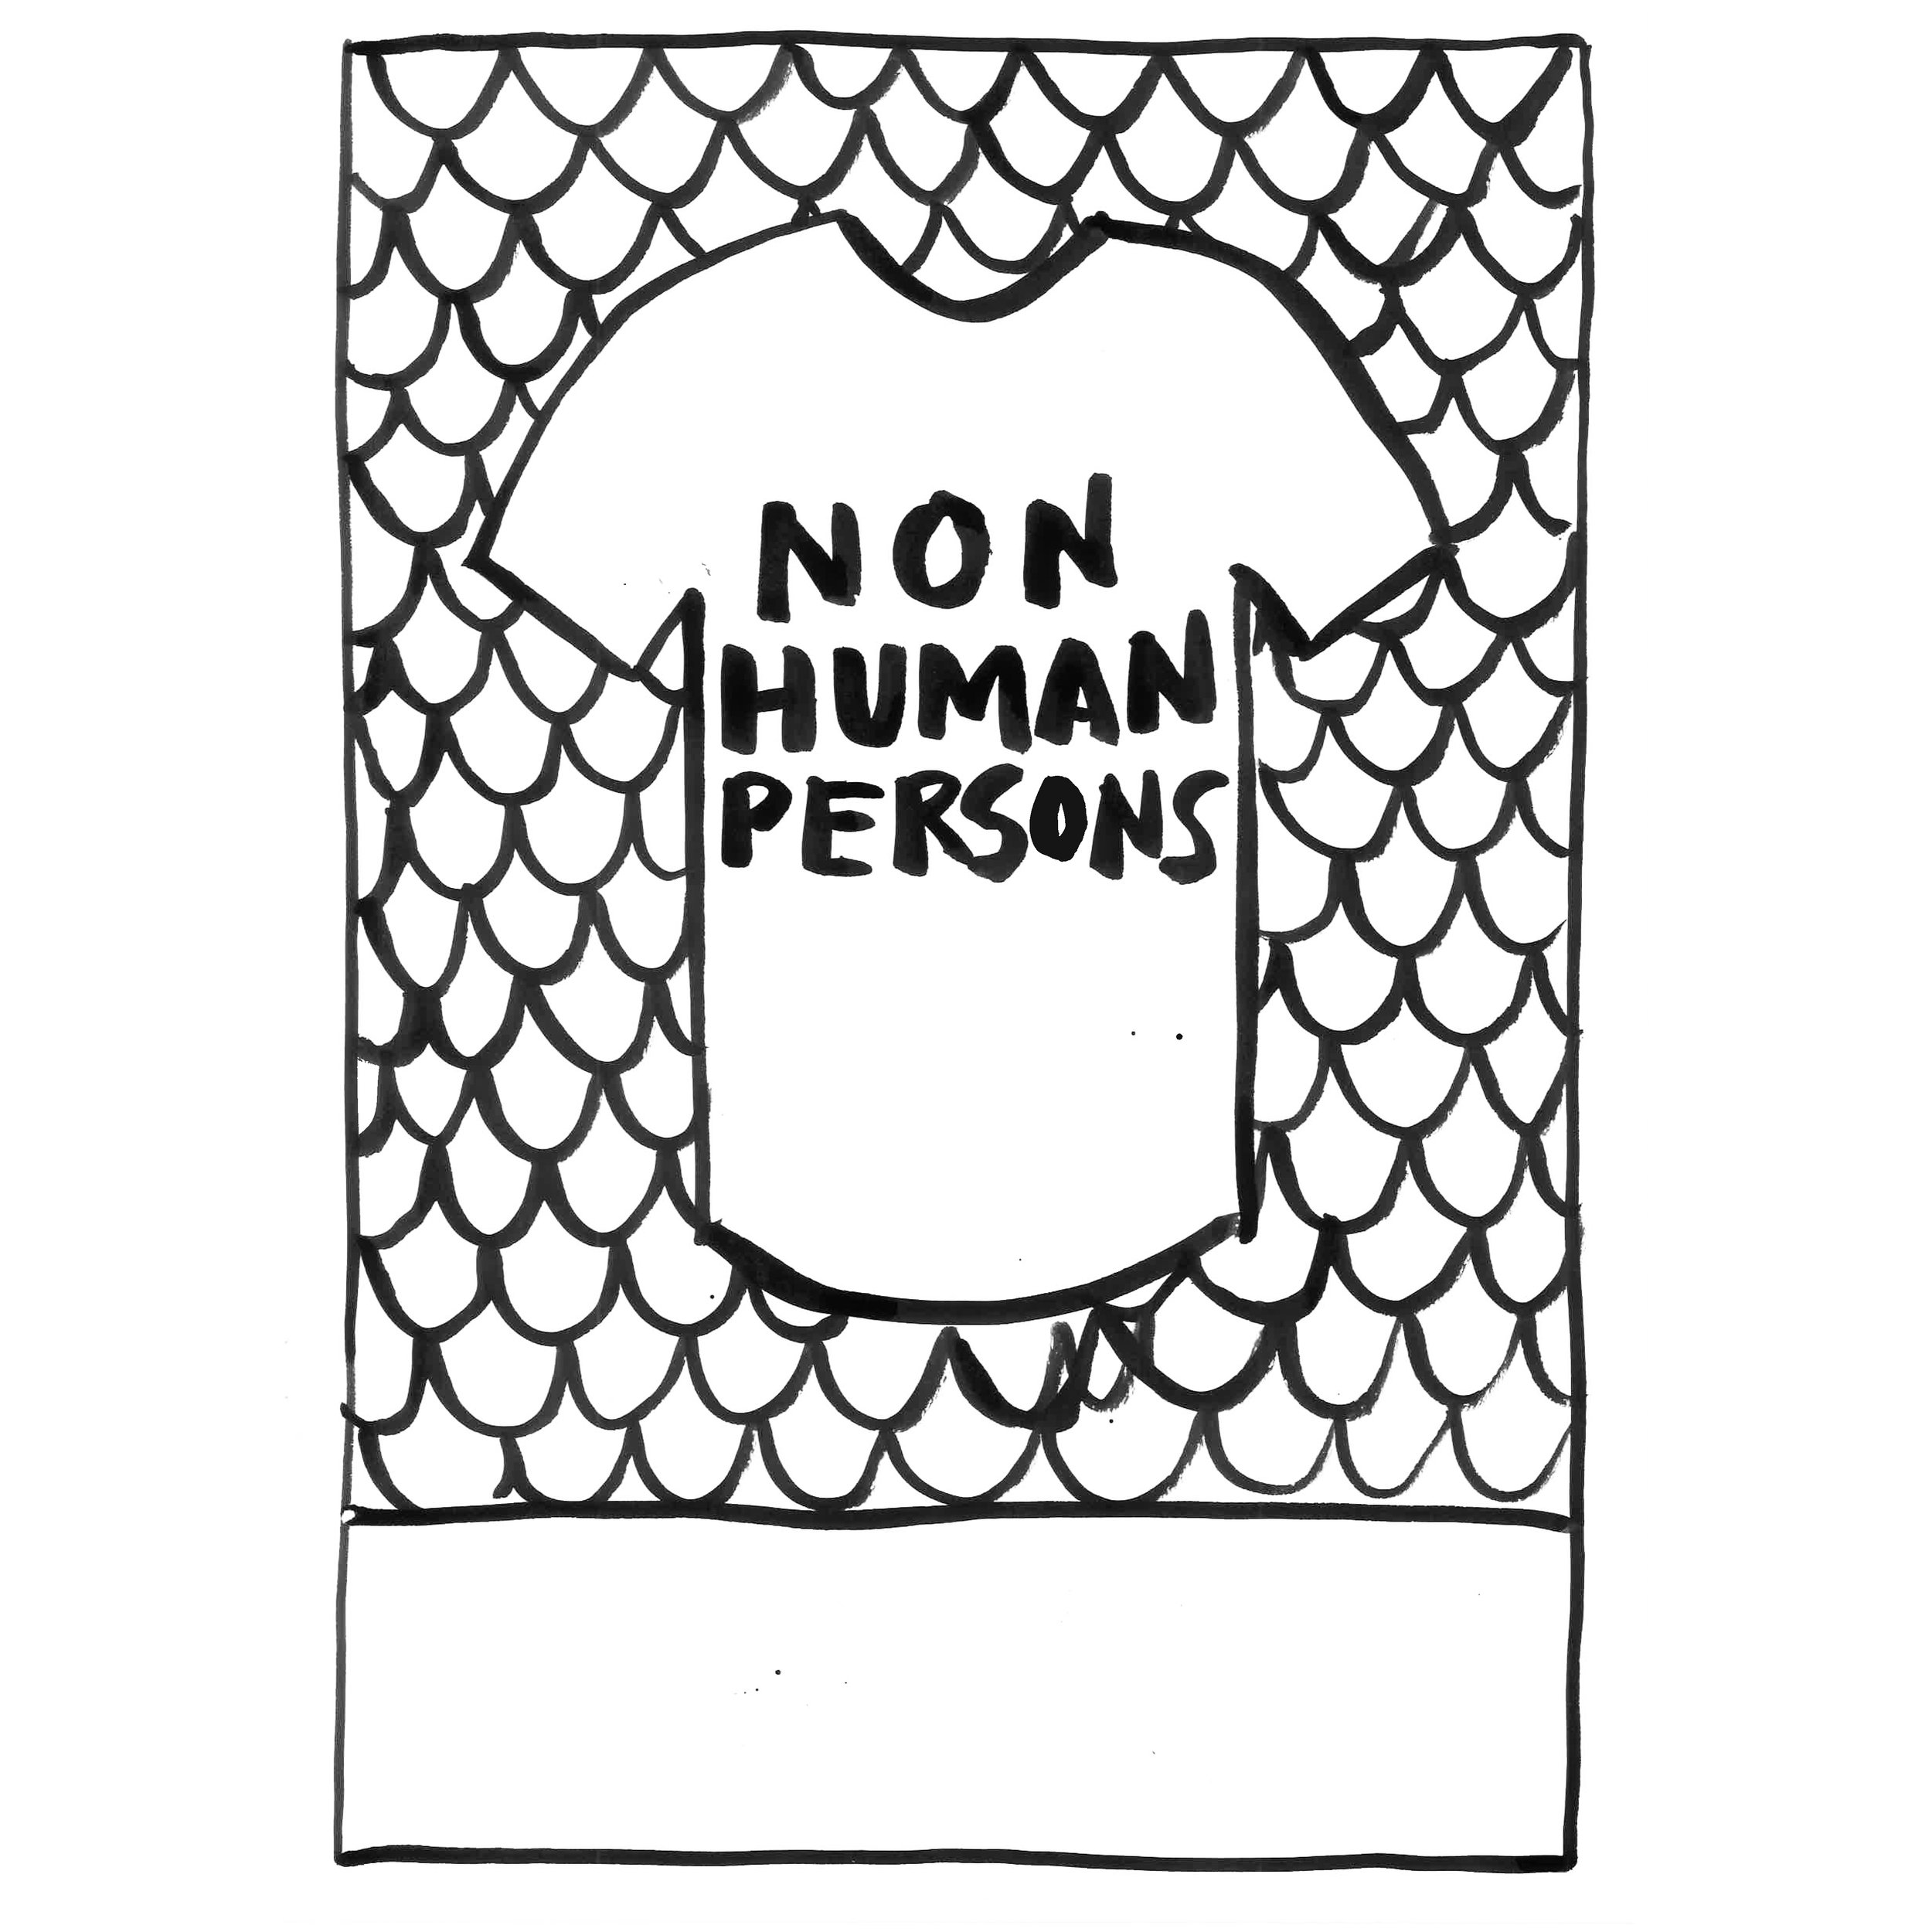 Non Human Persons.jpg